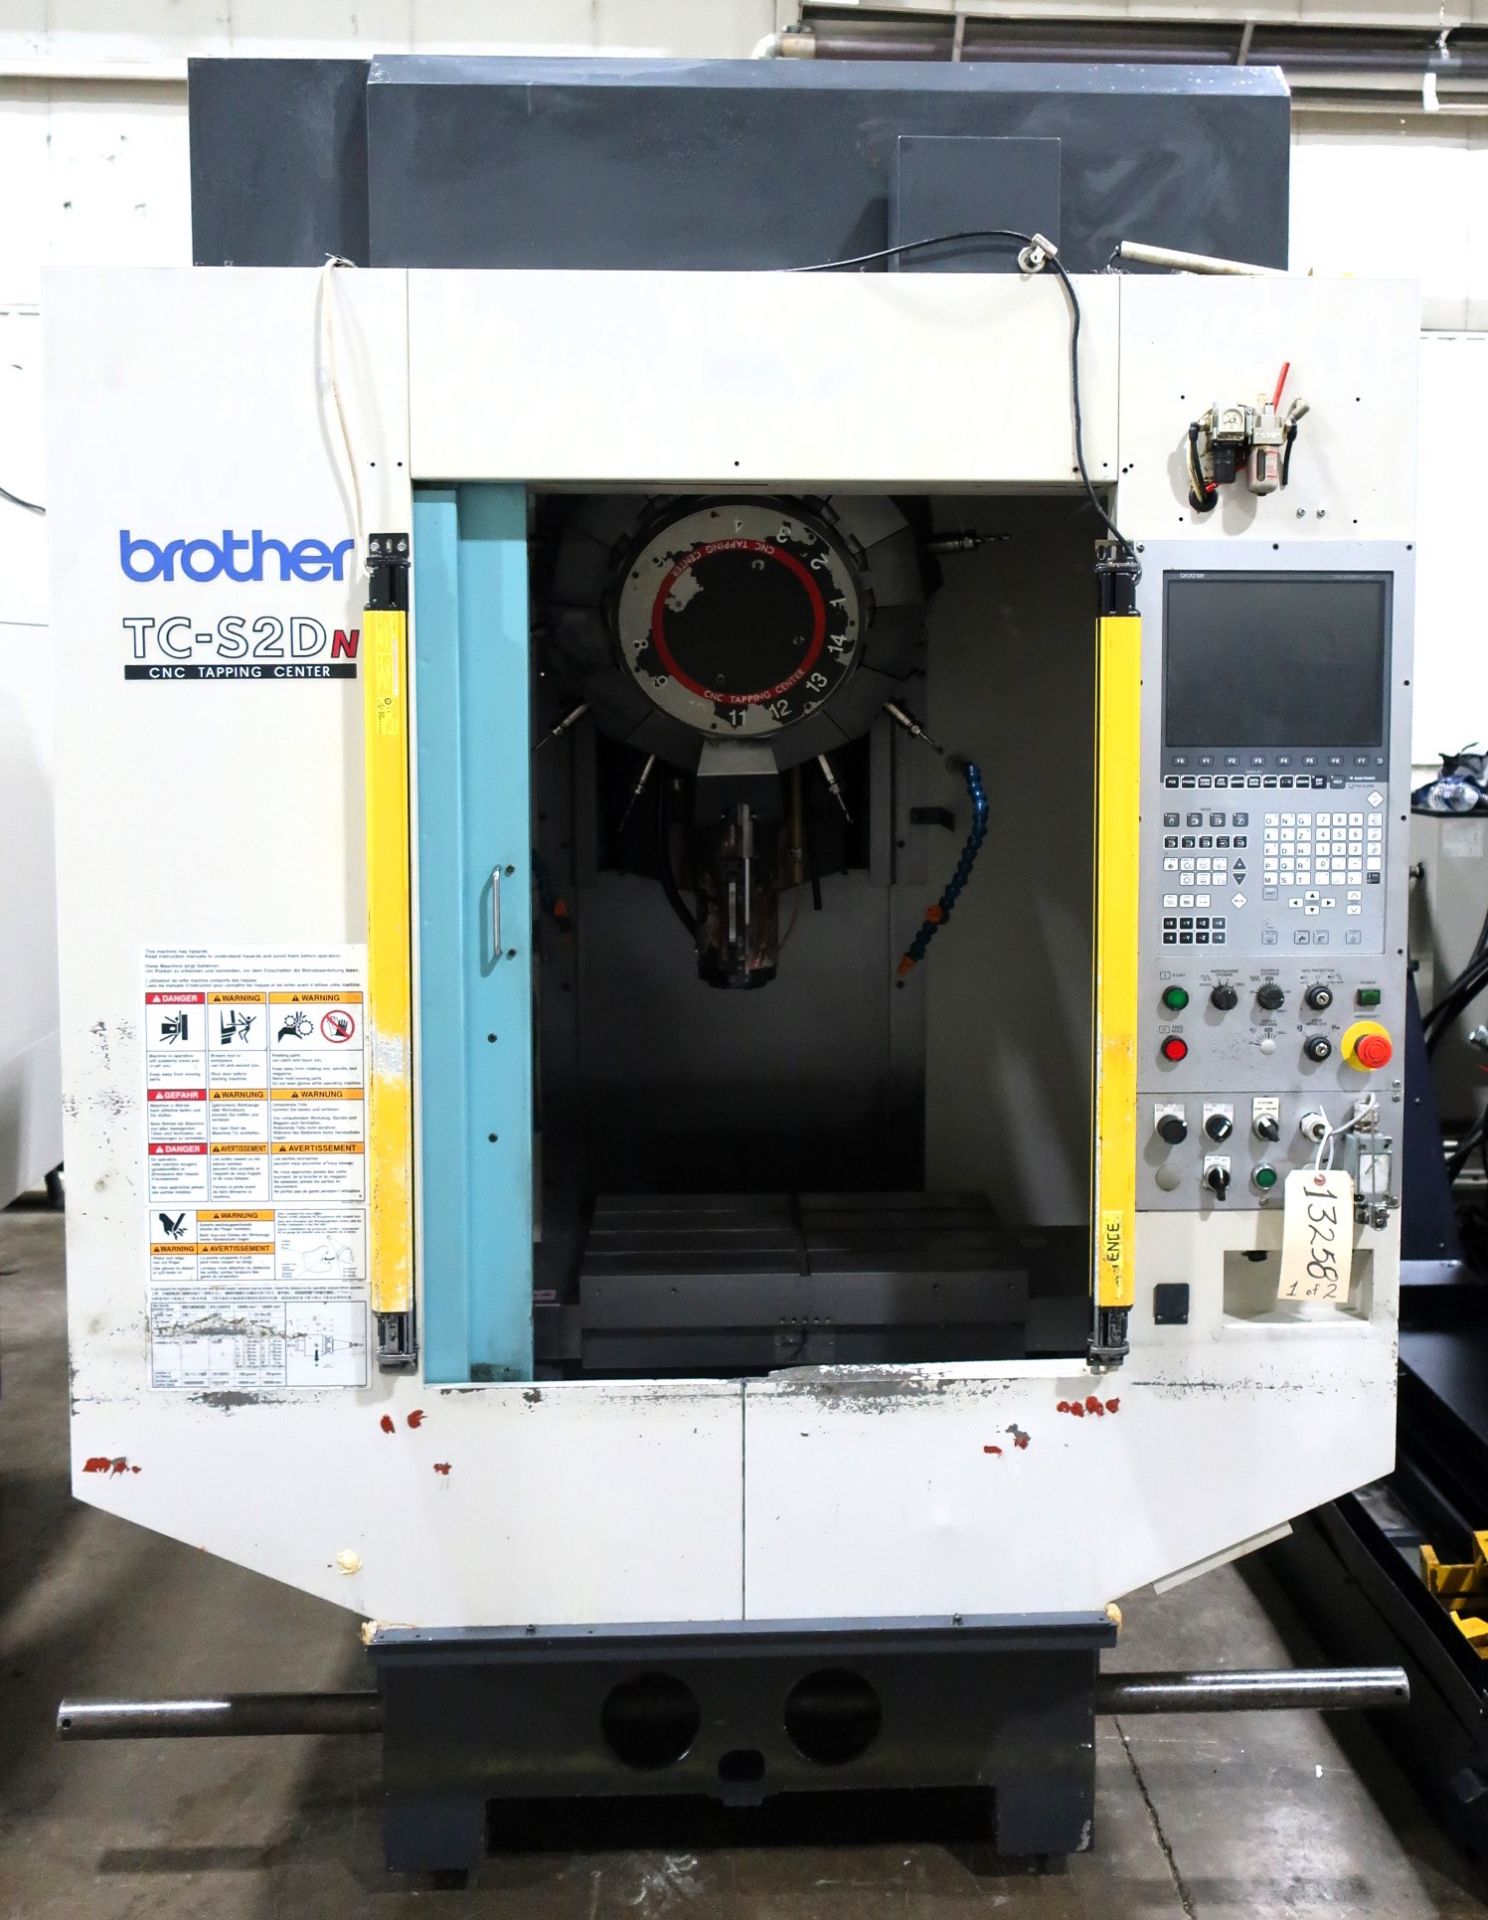 BROTHER TC-S2D 3-AXIS CNC DRILL TAP VERTICAL MACHINING CENTER, S/N 222804, NEW 2014